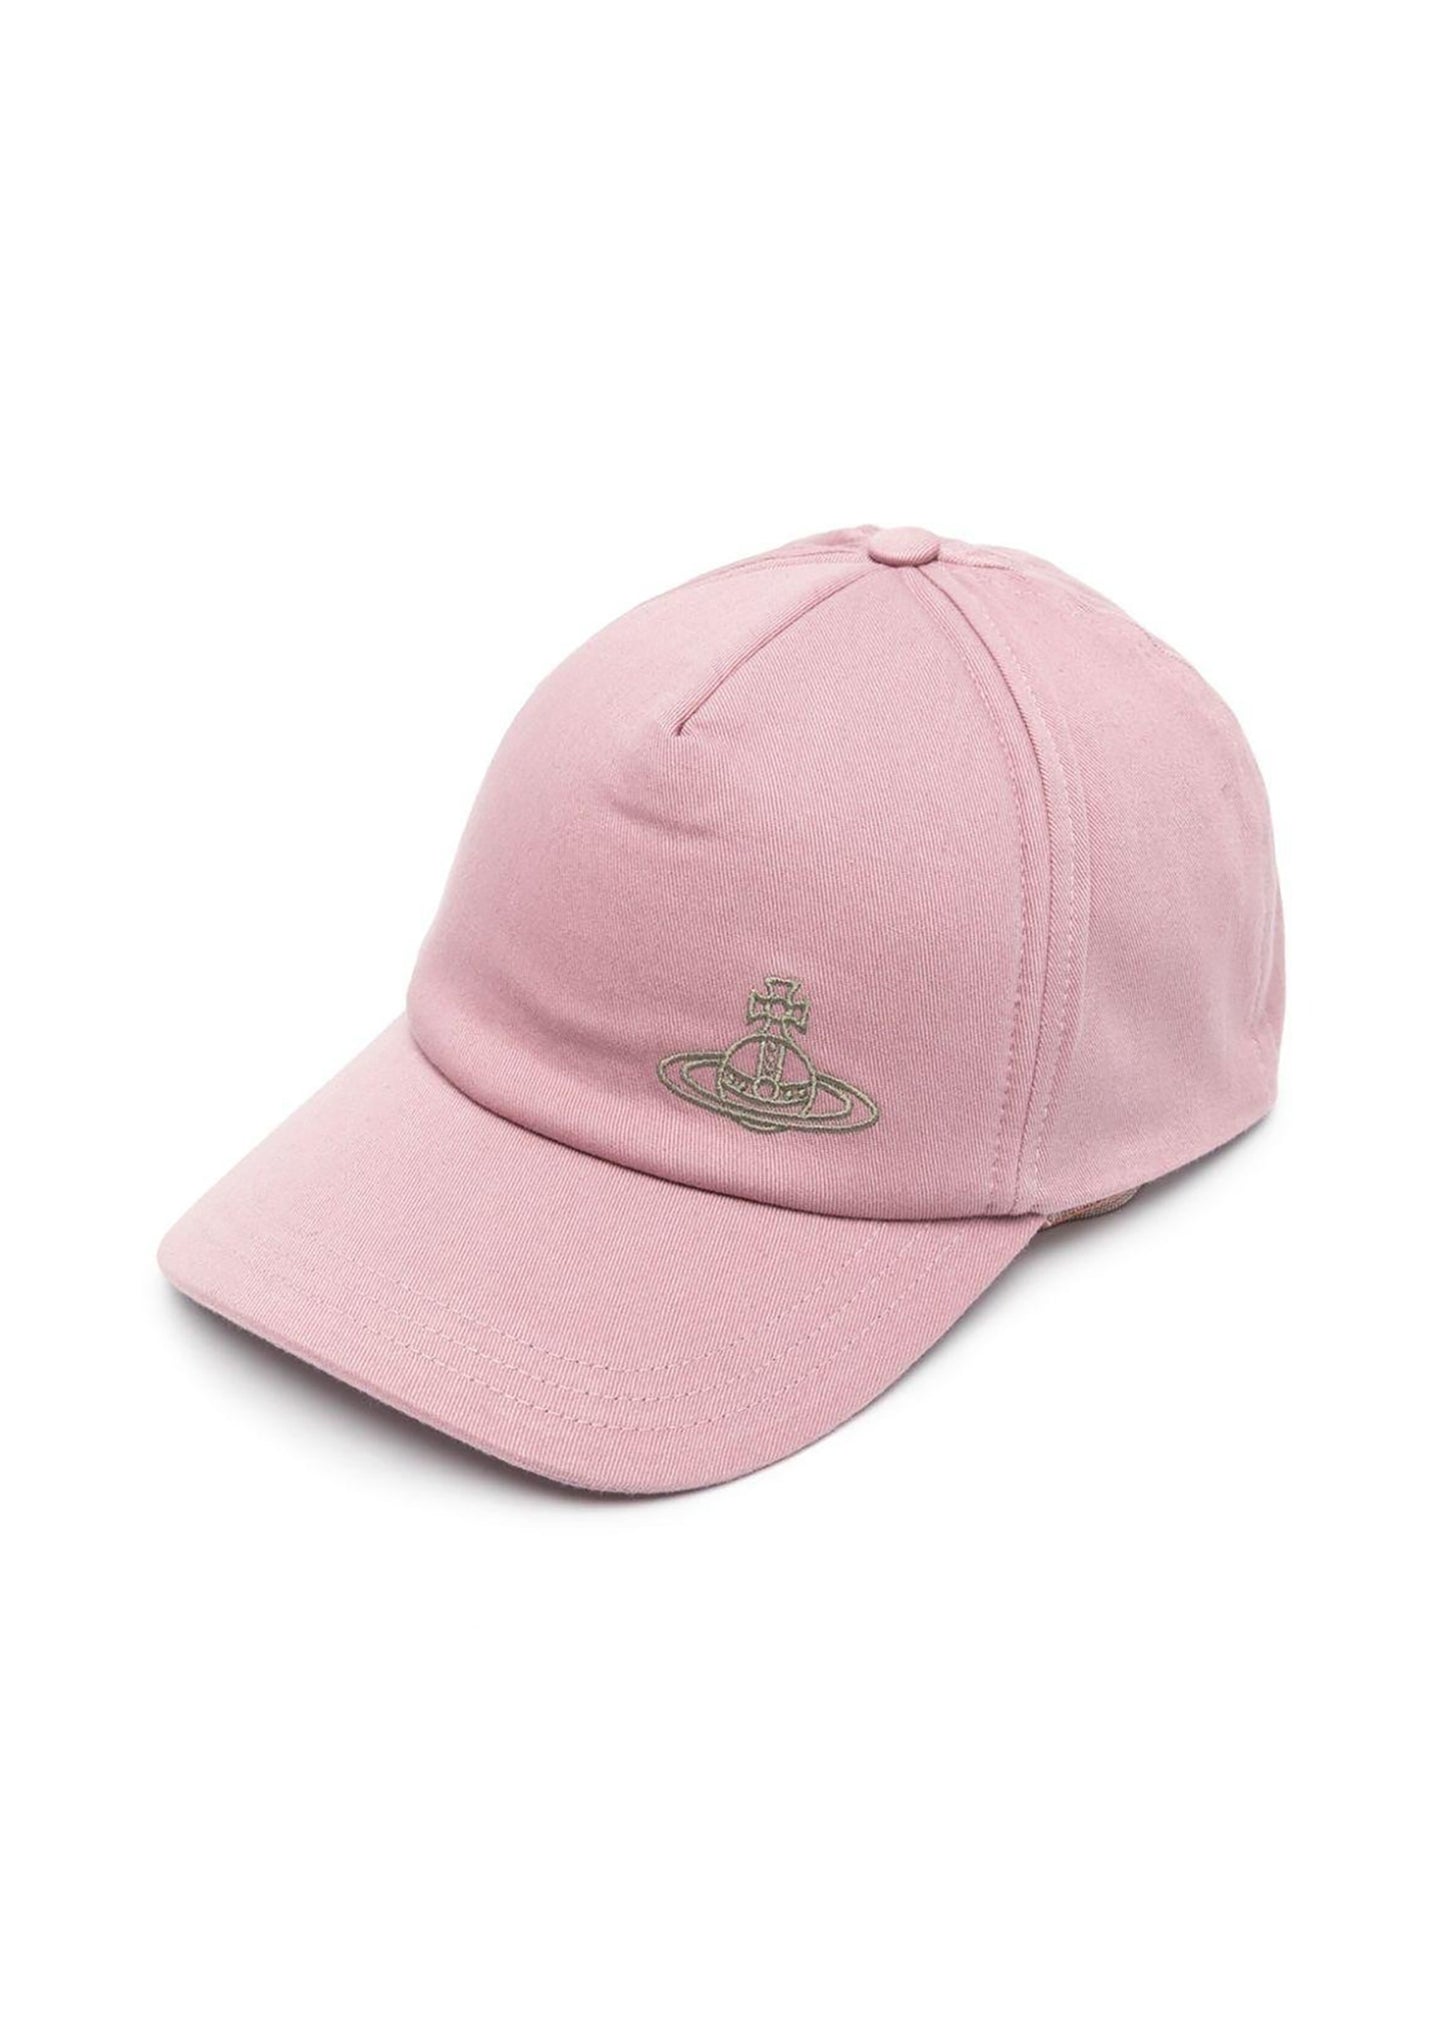 Orb-embroidered Cap